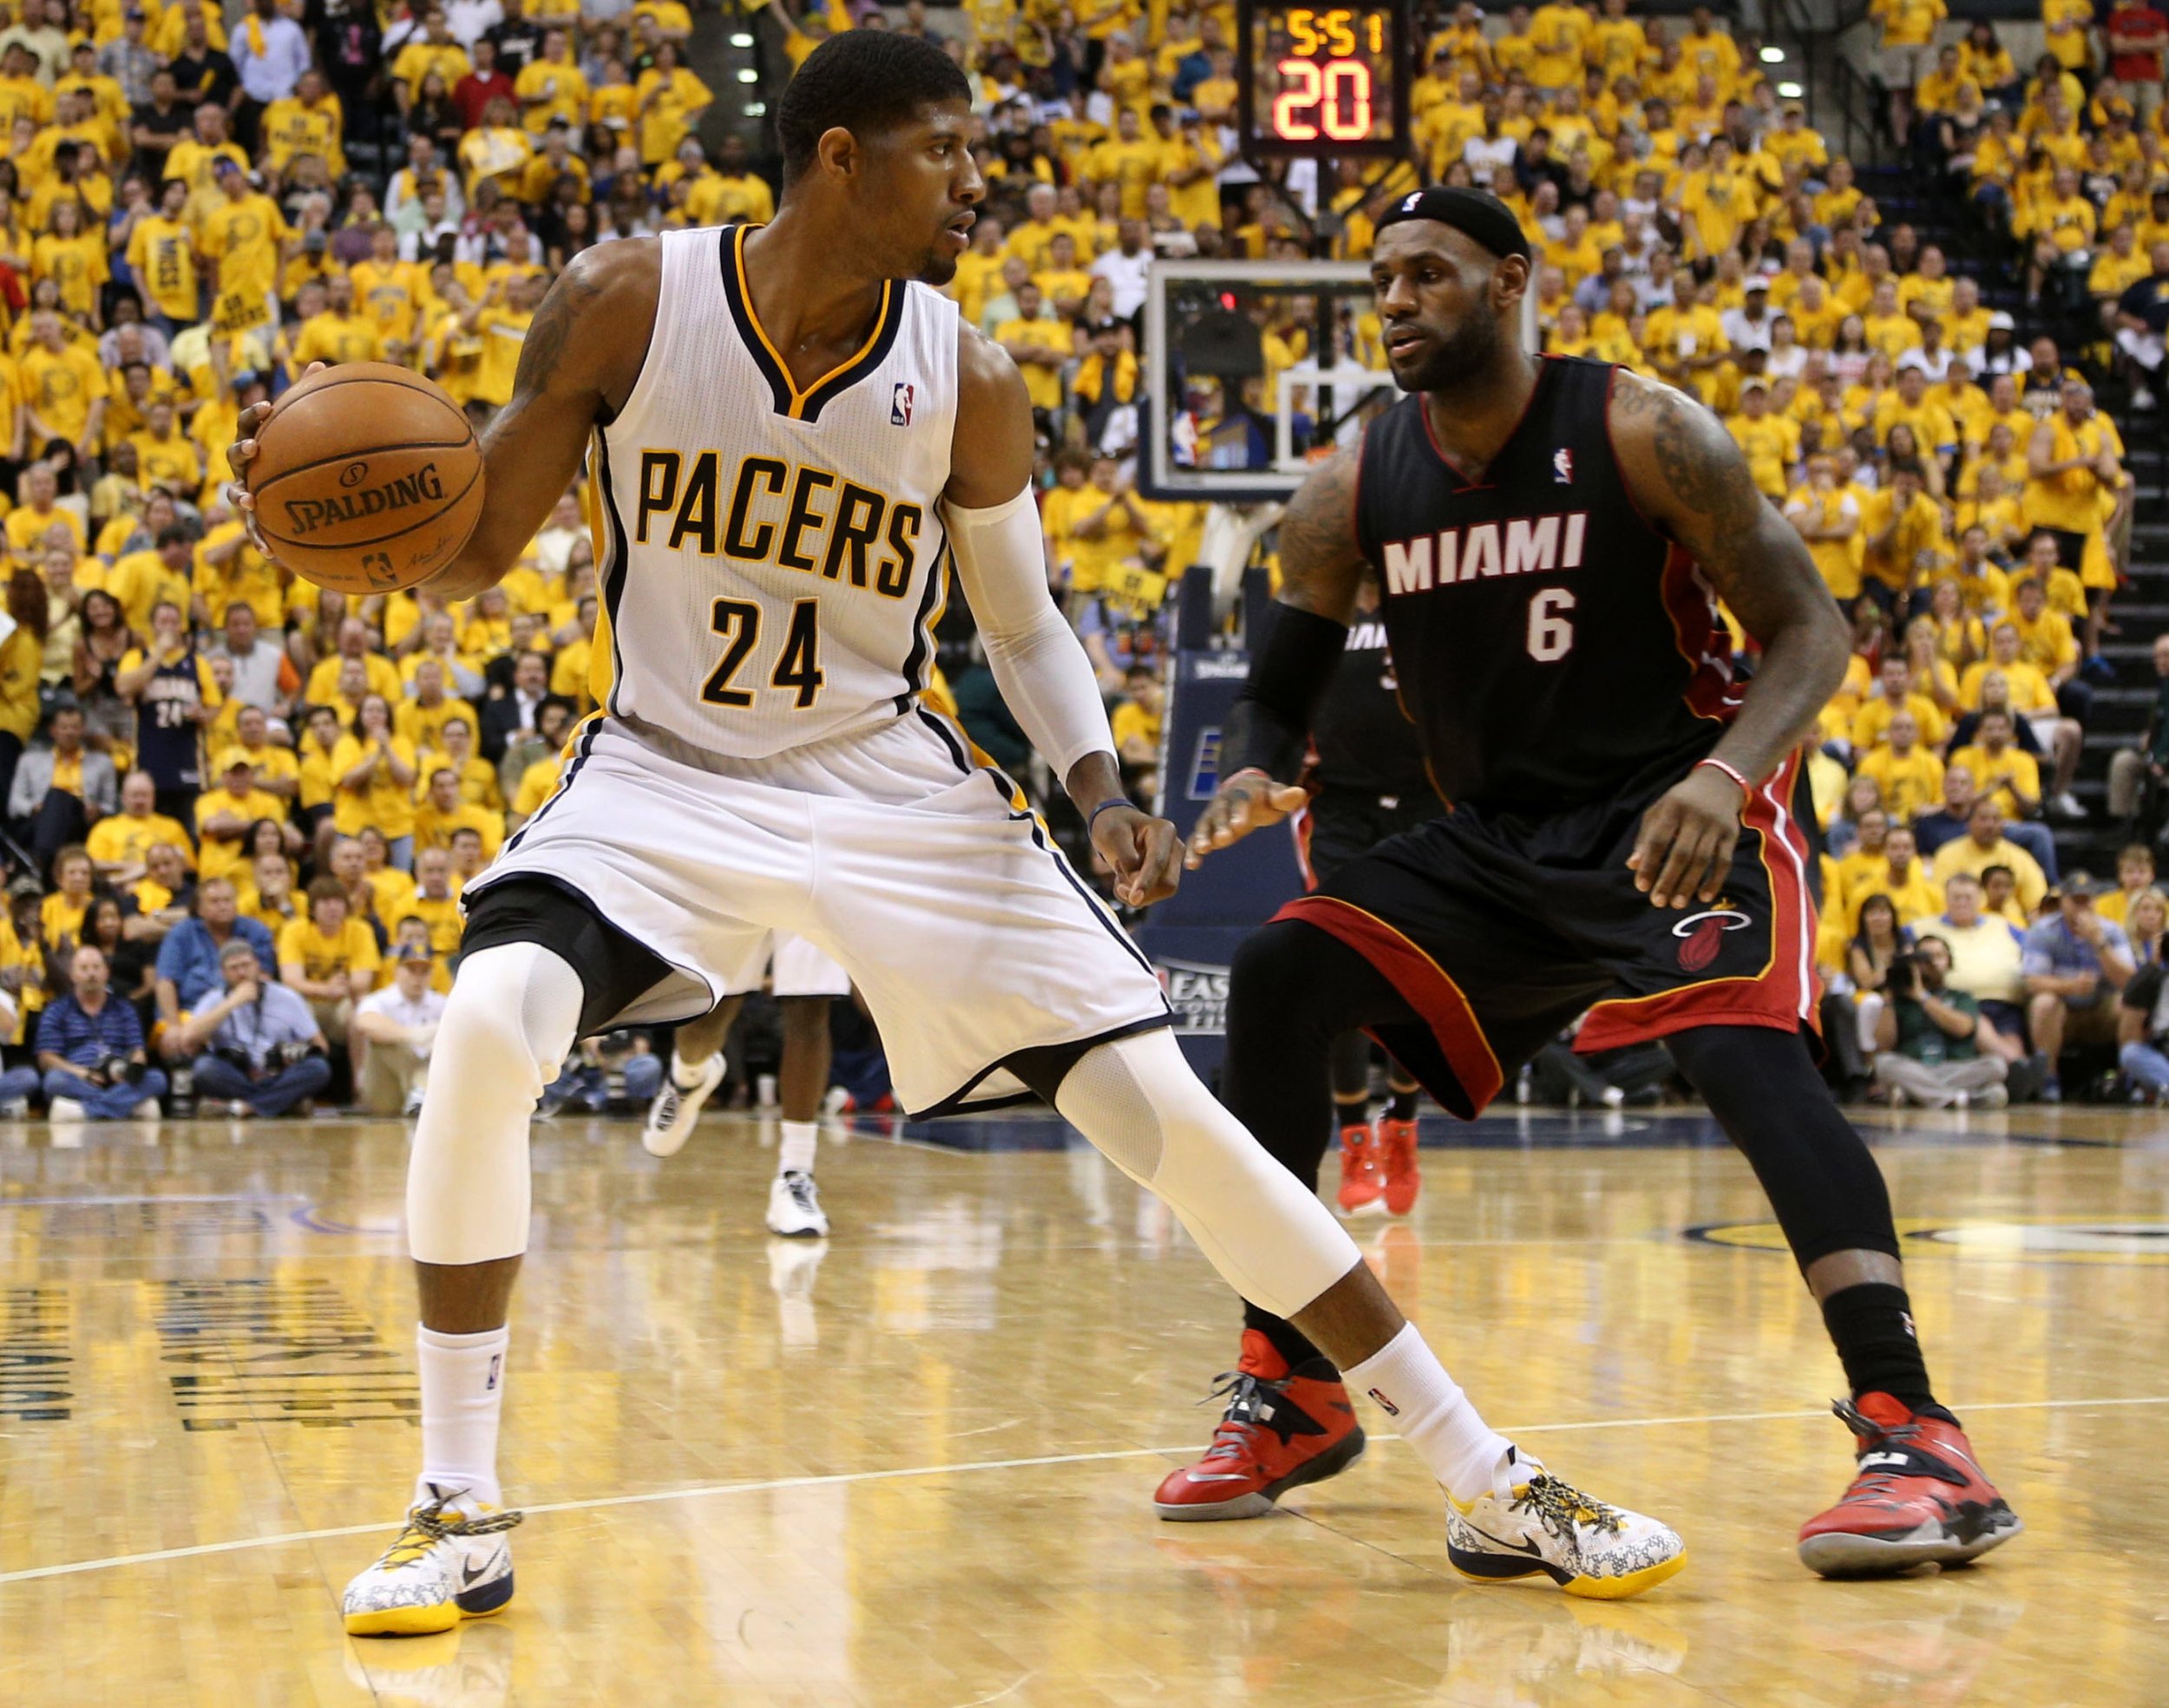 Indiana Pacers: Will Paul George's Return Get Pacers in the Playoffs?